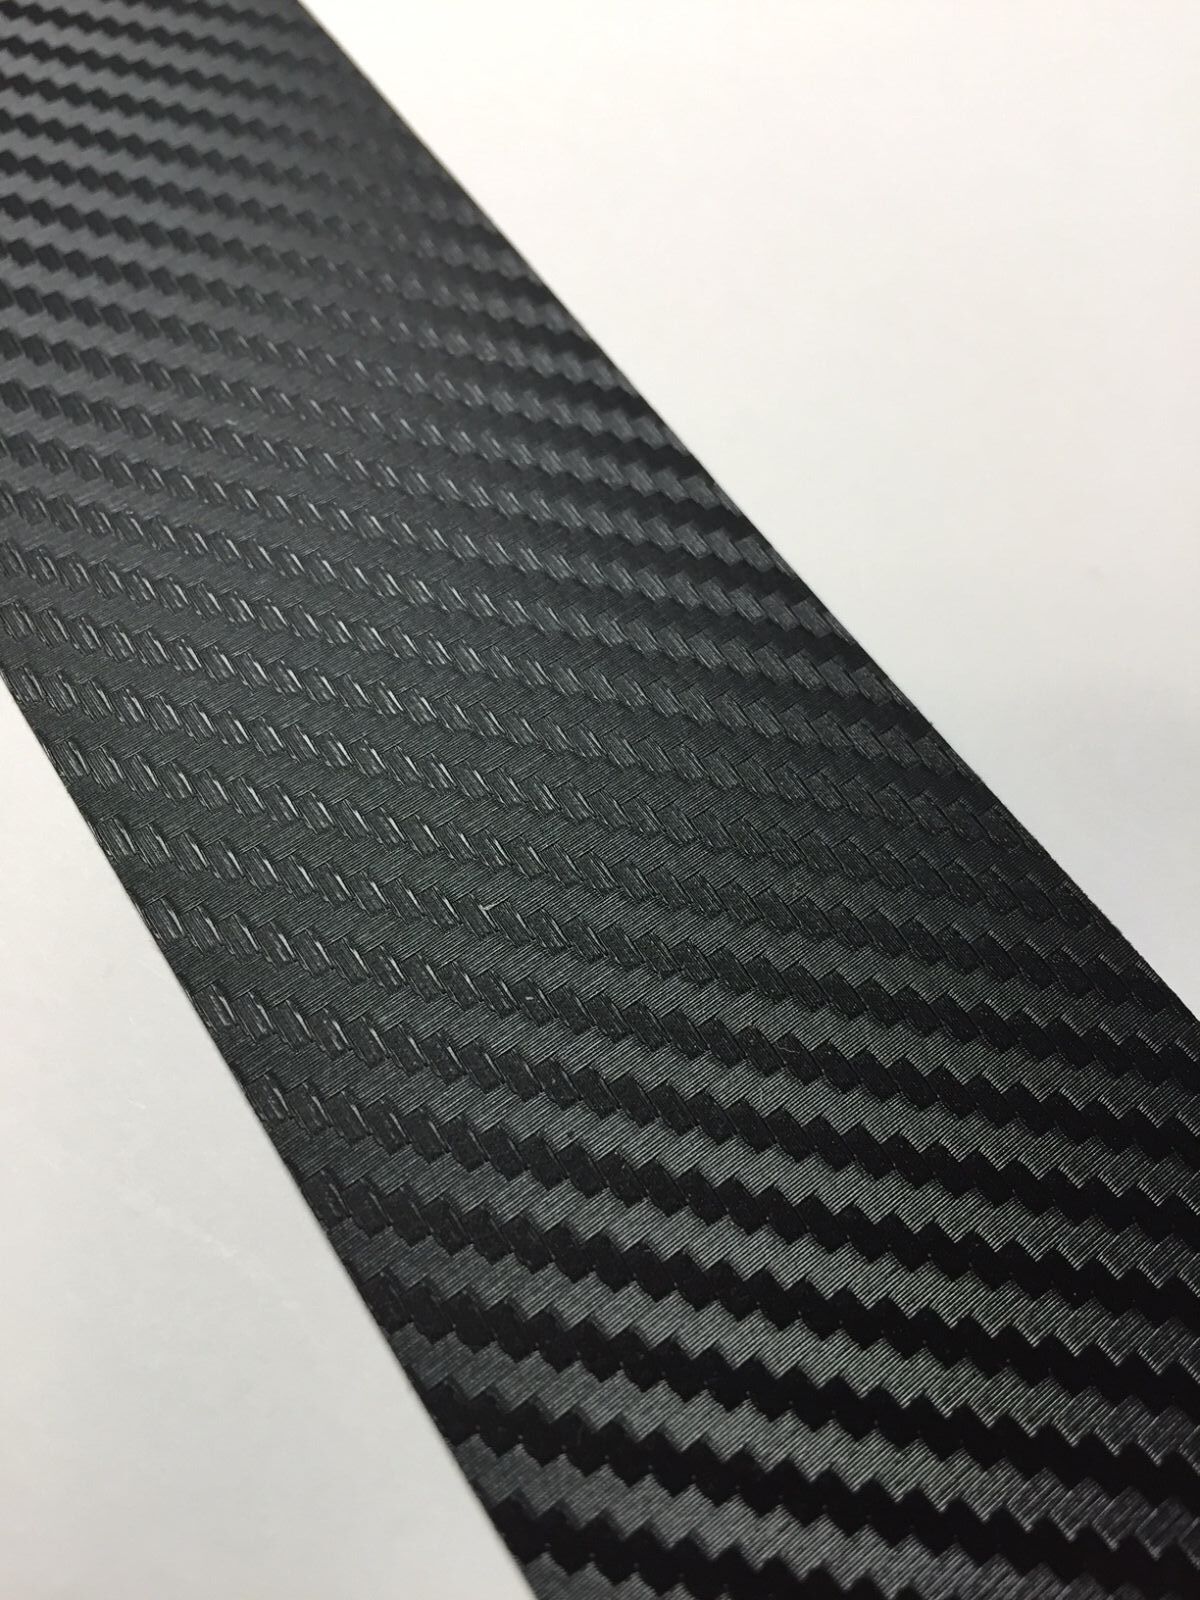 NEW Textured Carbon Fiber Tape, Flexible 6mil Thick, Automotive Grade Quality PSP Does Not Apply - фотография #2